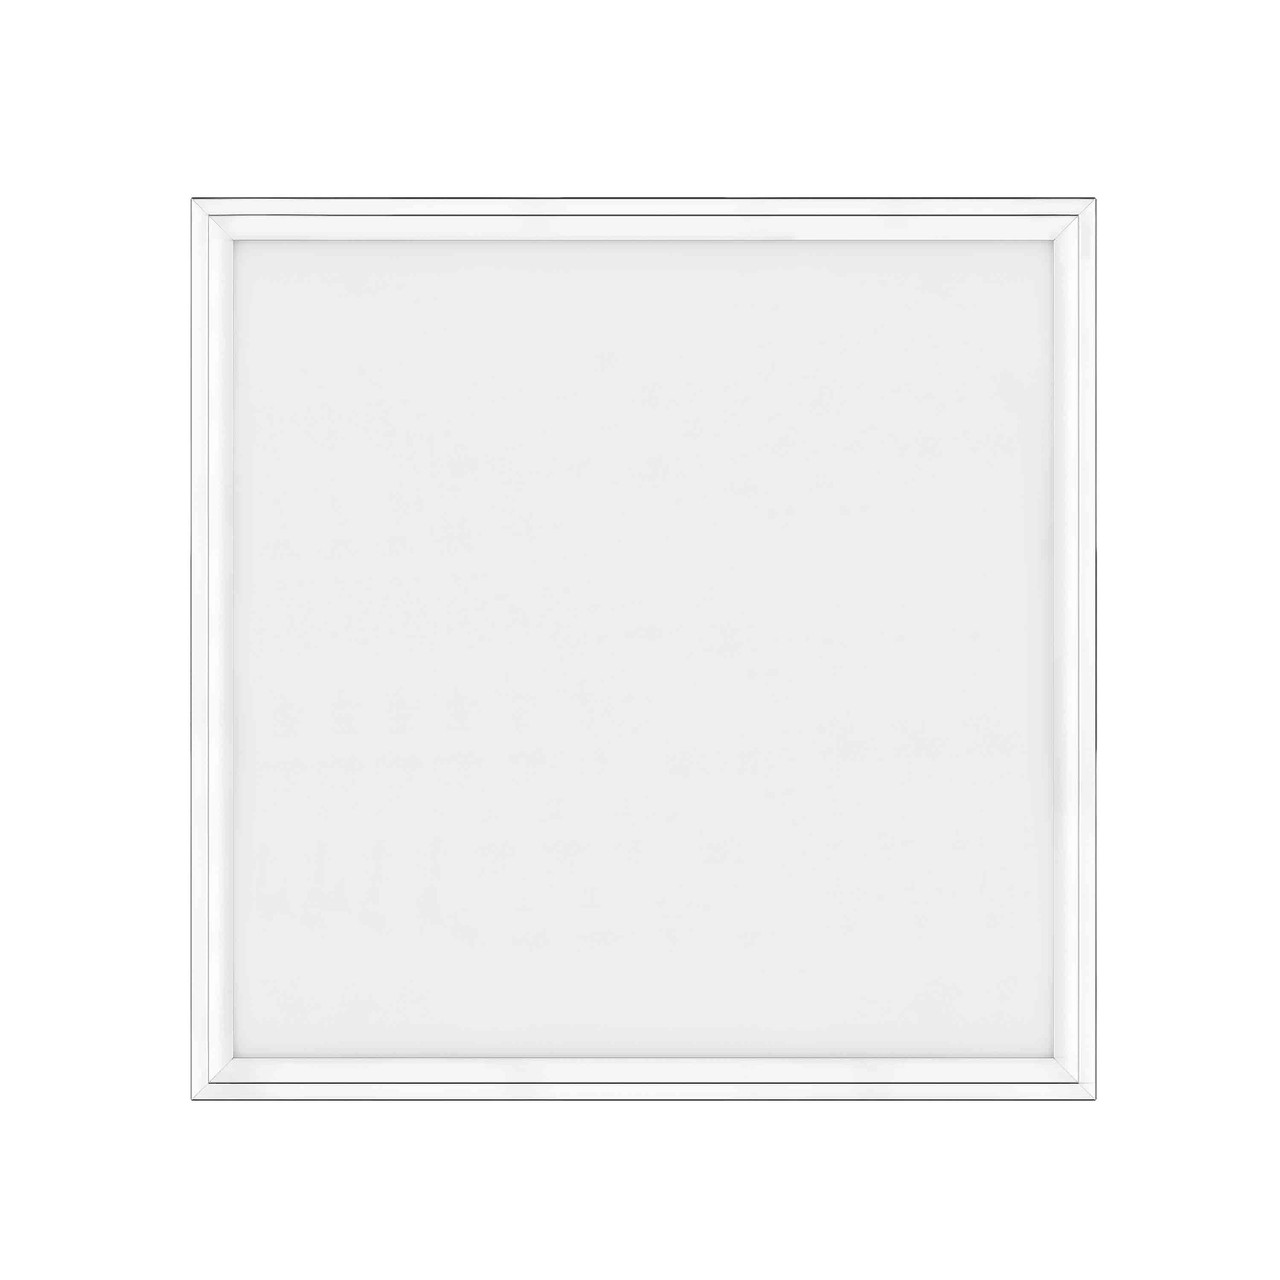 The premium-performance, ultra-thin, edge-lit LED panel
(LEDPNL2X2-PRM-CP) series offers industry-leading lumens per watt (LPW). This family of luminaires is designed to deliver general ambient lighting in a variety of indoor settings, including schools, offices, hospitals and stores, and is the perfect choice for both new construction and retrofits. This high-efficacy luminaire provides long-life and uniform illumination, as well as standard 0-10 vdc dimming capability.

▪ Available in 3000k (warm white), 3500k (warm/neutral white) 4000k (neutral white) & 5000k (cool white) color temperatures.*
▪ Long-life LEDs provide 199,000 hours of operation with at least 70% of initial lumen output (L70).**
▪ LEDPNL2X2-20W provides 2,730 luminaire lumens (124 lumens per watt, LPW) at 3000k; 2,754 luminaire lumens (125 LPW) at both 3500k; 2,769 luminaire lumens (126 LPW) at 4000k, and 2,799 luminaire lumens (127 LPW) at 5000k.*
▪ LEDPNL2X2-32W provides 4,016 luminaire lumens (126 LPW) at 3000k; 4,079 luminaire lumens (127 LPW) at both 3500k; 4,109 luminaire lumens (128 LPW) at 4000k, and 4,170 luminaire lumens (130 LPW) at 5000k.*
▪ Uniform illumination with no visible LED pixilation.
▪ Universal 120-277 AC voltage (50-60Hz) is standard.
▪ 0-10vdc dimming capability is standard.
▪ Power factor > 0.90.
▪ Total harmonic distortion < 20%.
▪ Color rendering index > 80.
▪ Aluminum housing.
▪ Acrylic lens with light guide panels for optimal light distribution and efficiency.
▪ Easy installation in new construction or retrofit.
▪ Standard earthquake clips provide secure installation in grid ceilings.
▪ Standard mounting options include recessed mounting in grid ceilings, or suspended mounting using attached hanging brackets. For mounting in plaster or other hard ceiling, see Mounting Kits.